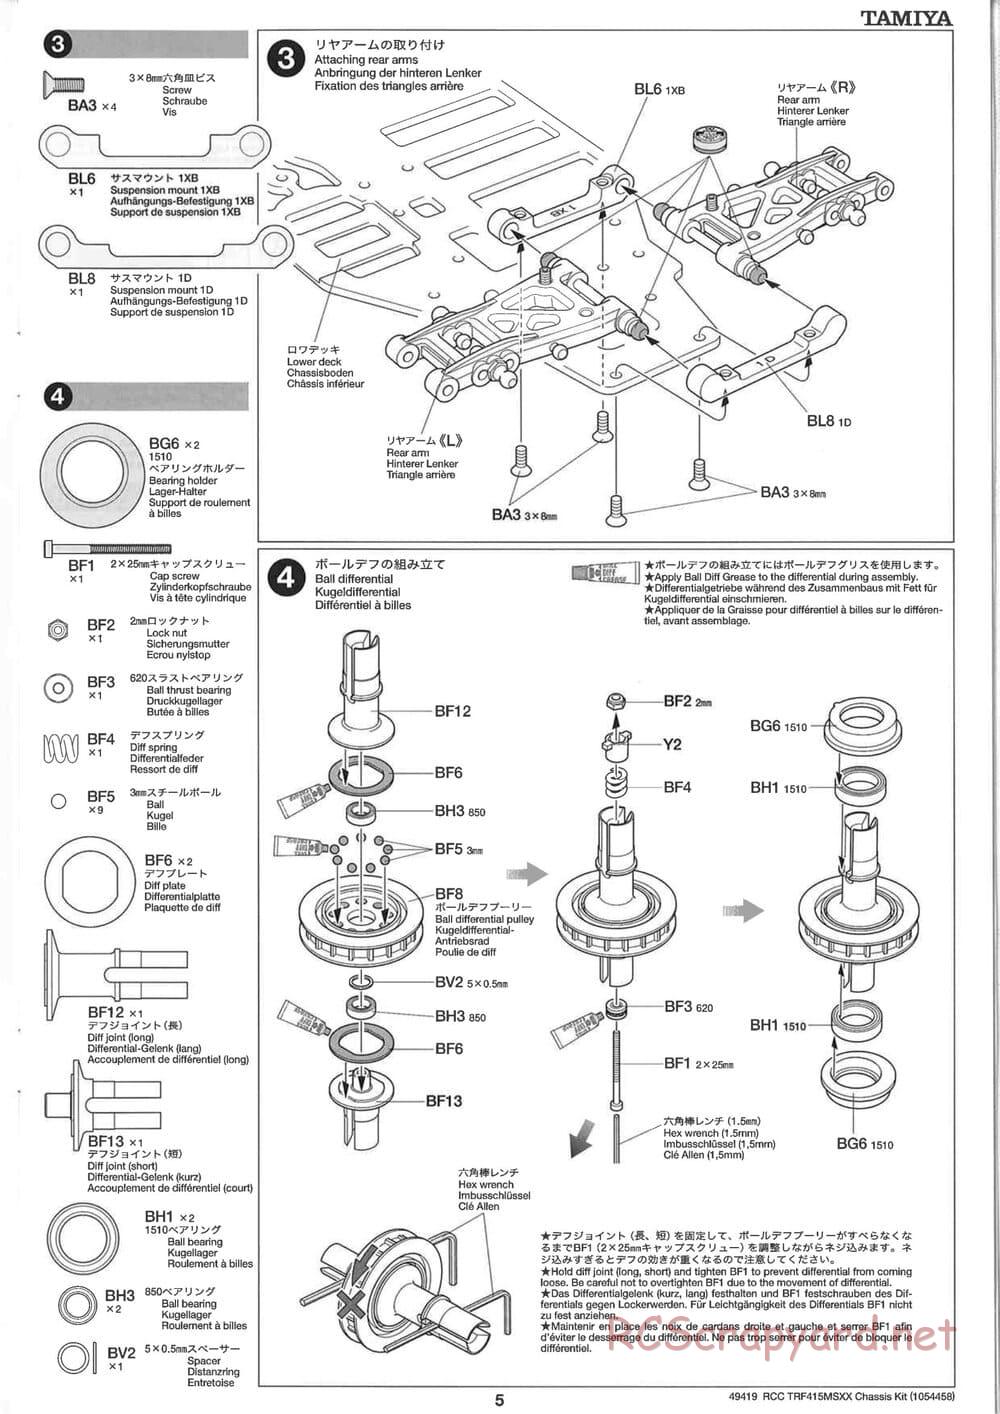 Tamiya - TRF415-MSXX Chassis - Manual - Page 5